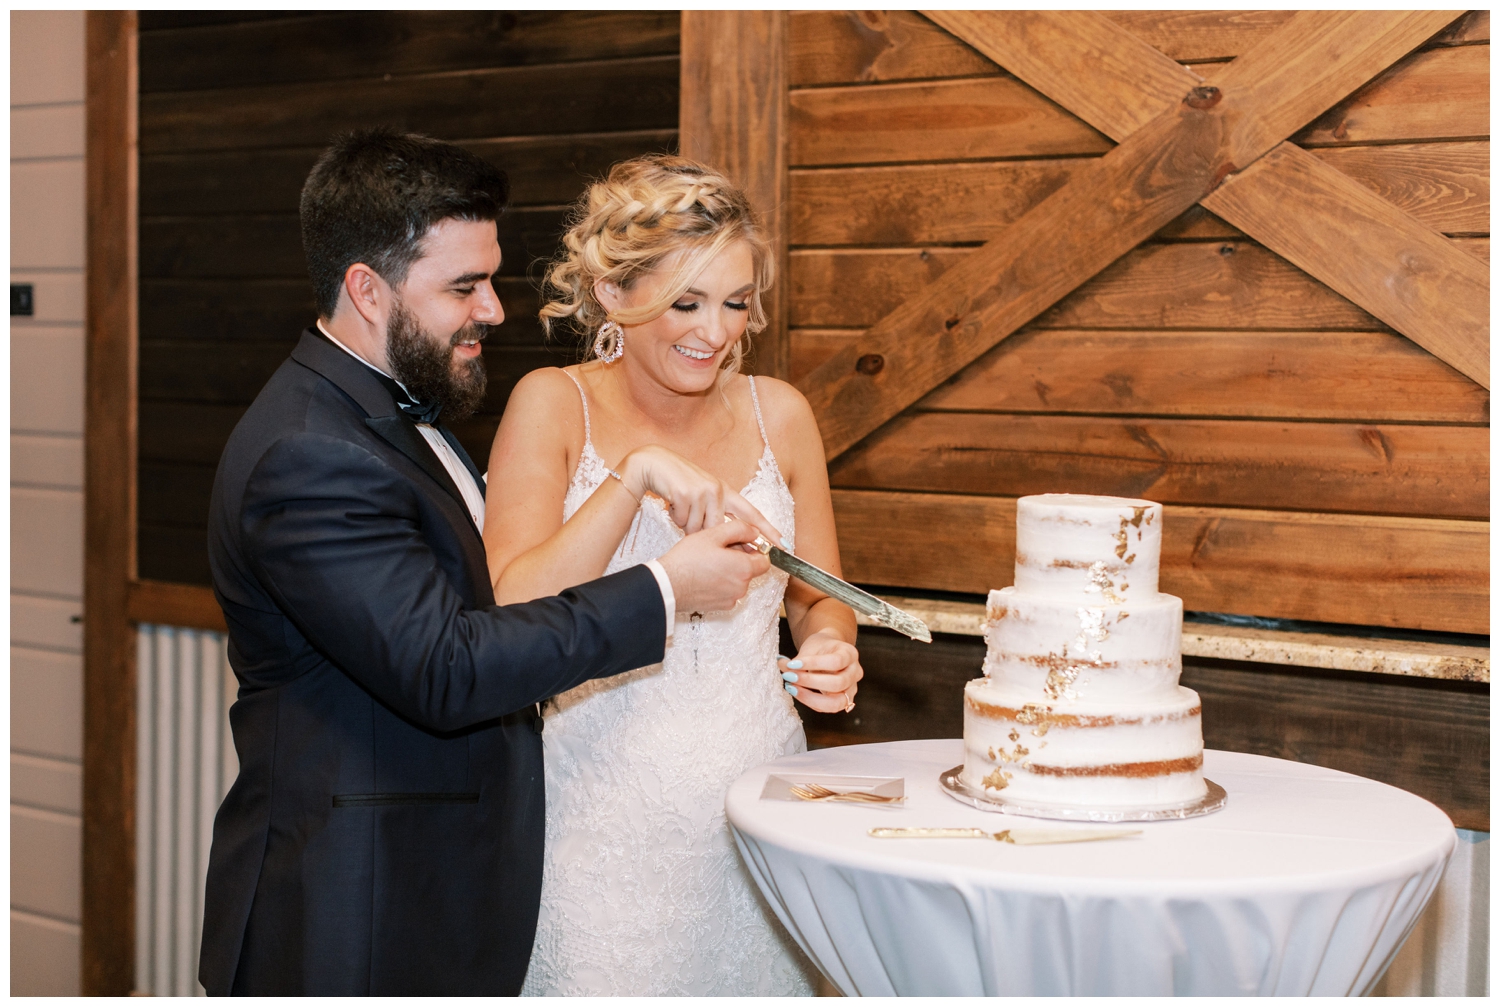 bride and groom cutting all white cake at reception at Peach Creek Ranch wedding